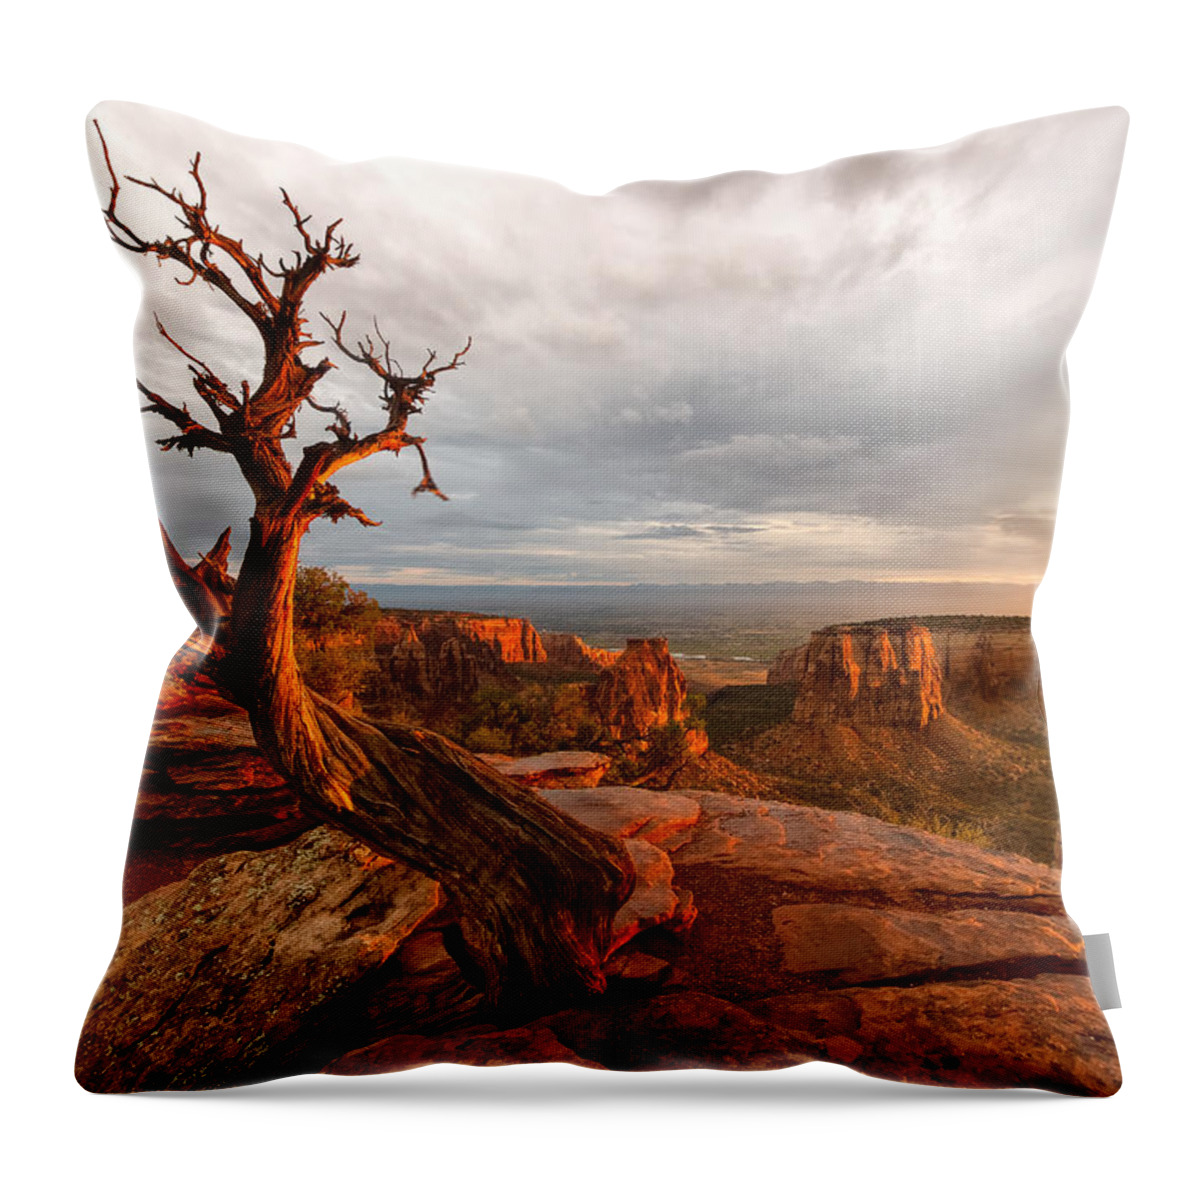 Colorado Throw Pillow featuring the photograph The Light on the Crooked Old Tree by Ronda Kimbrow